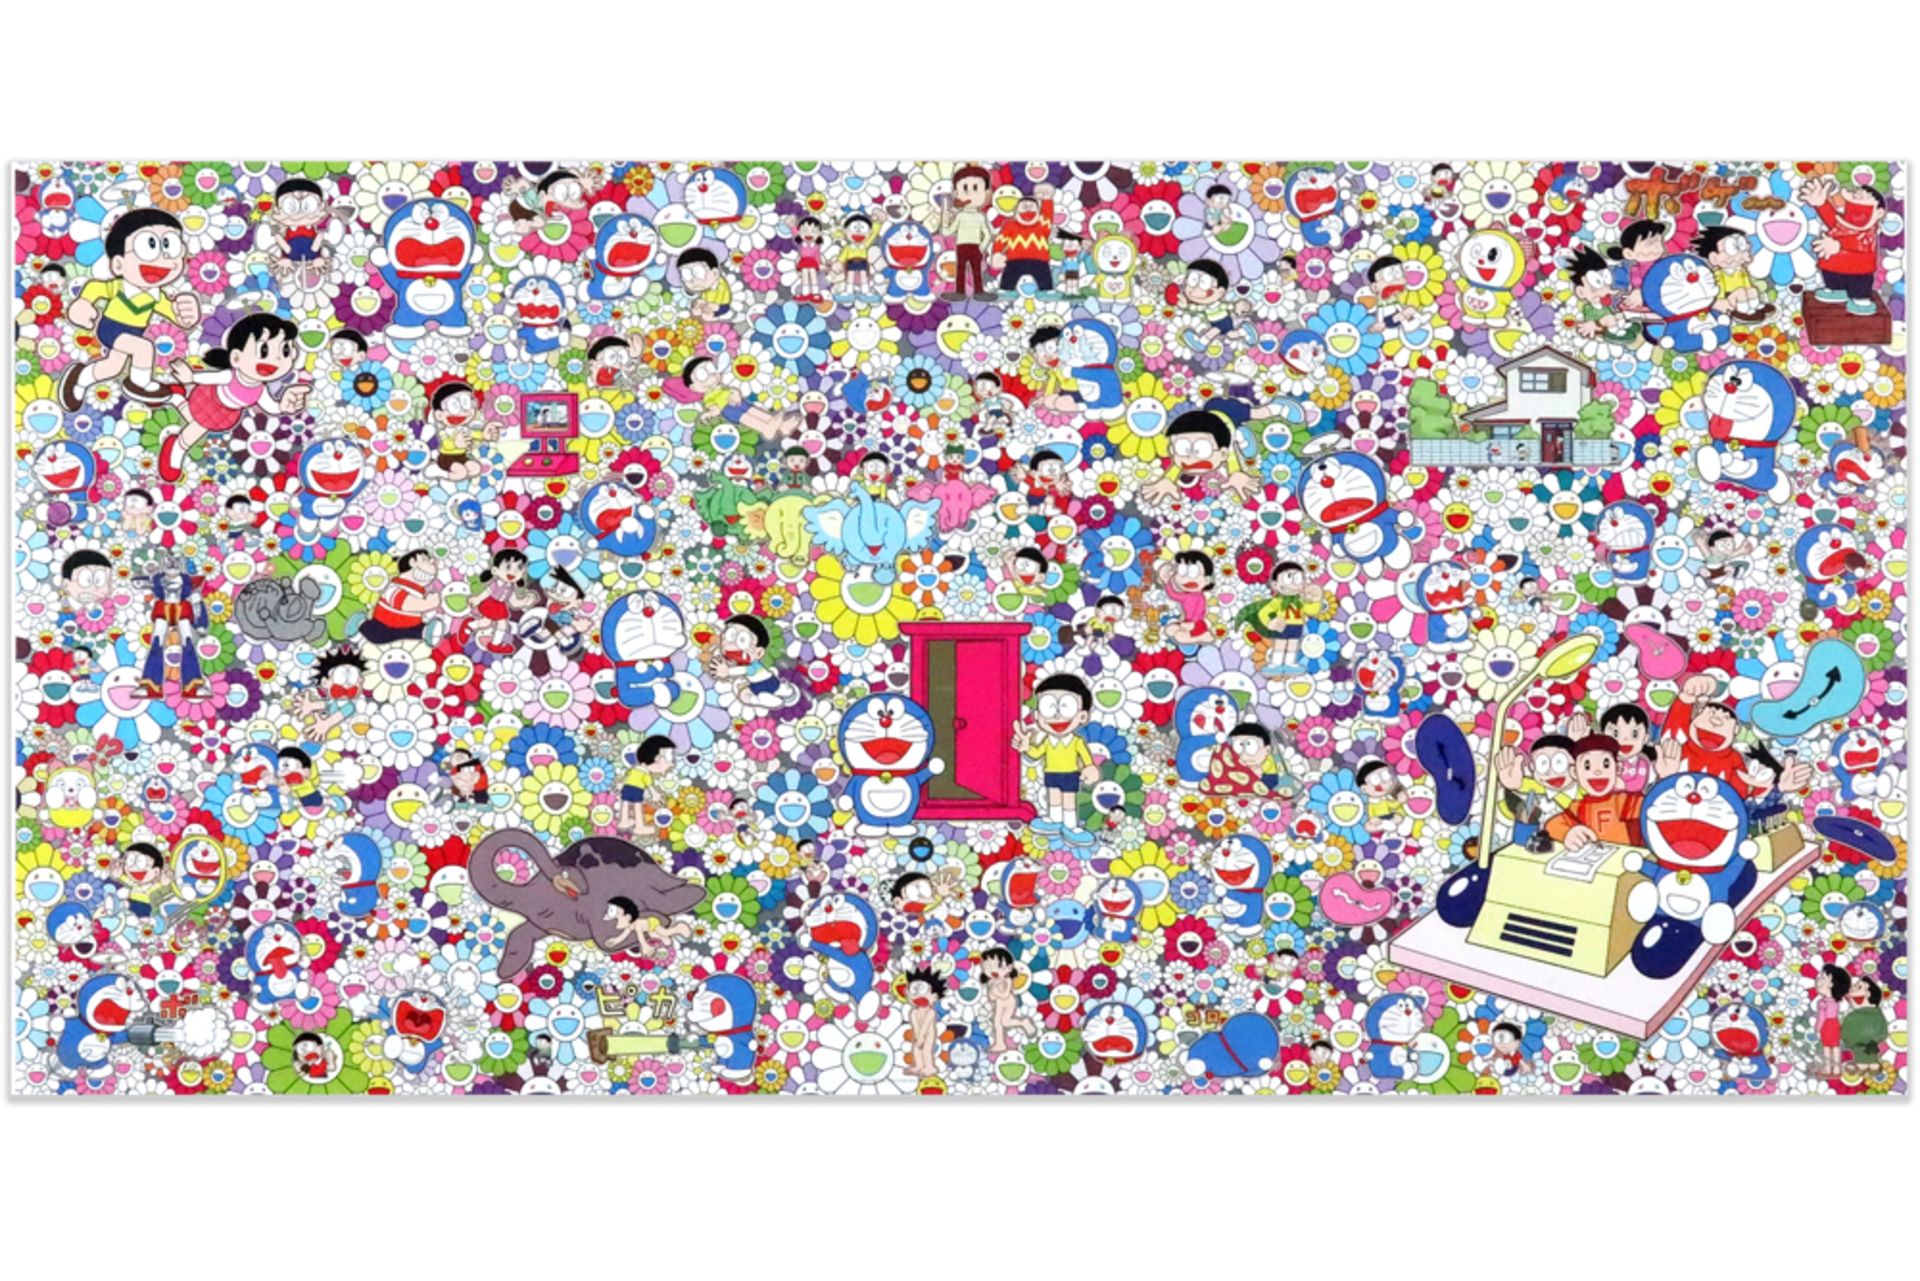 Takashi Murakami "That Sounds Good, I Hope You Can Do That" offset lithograph printed in colors -